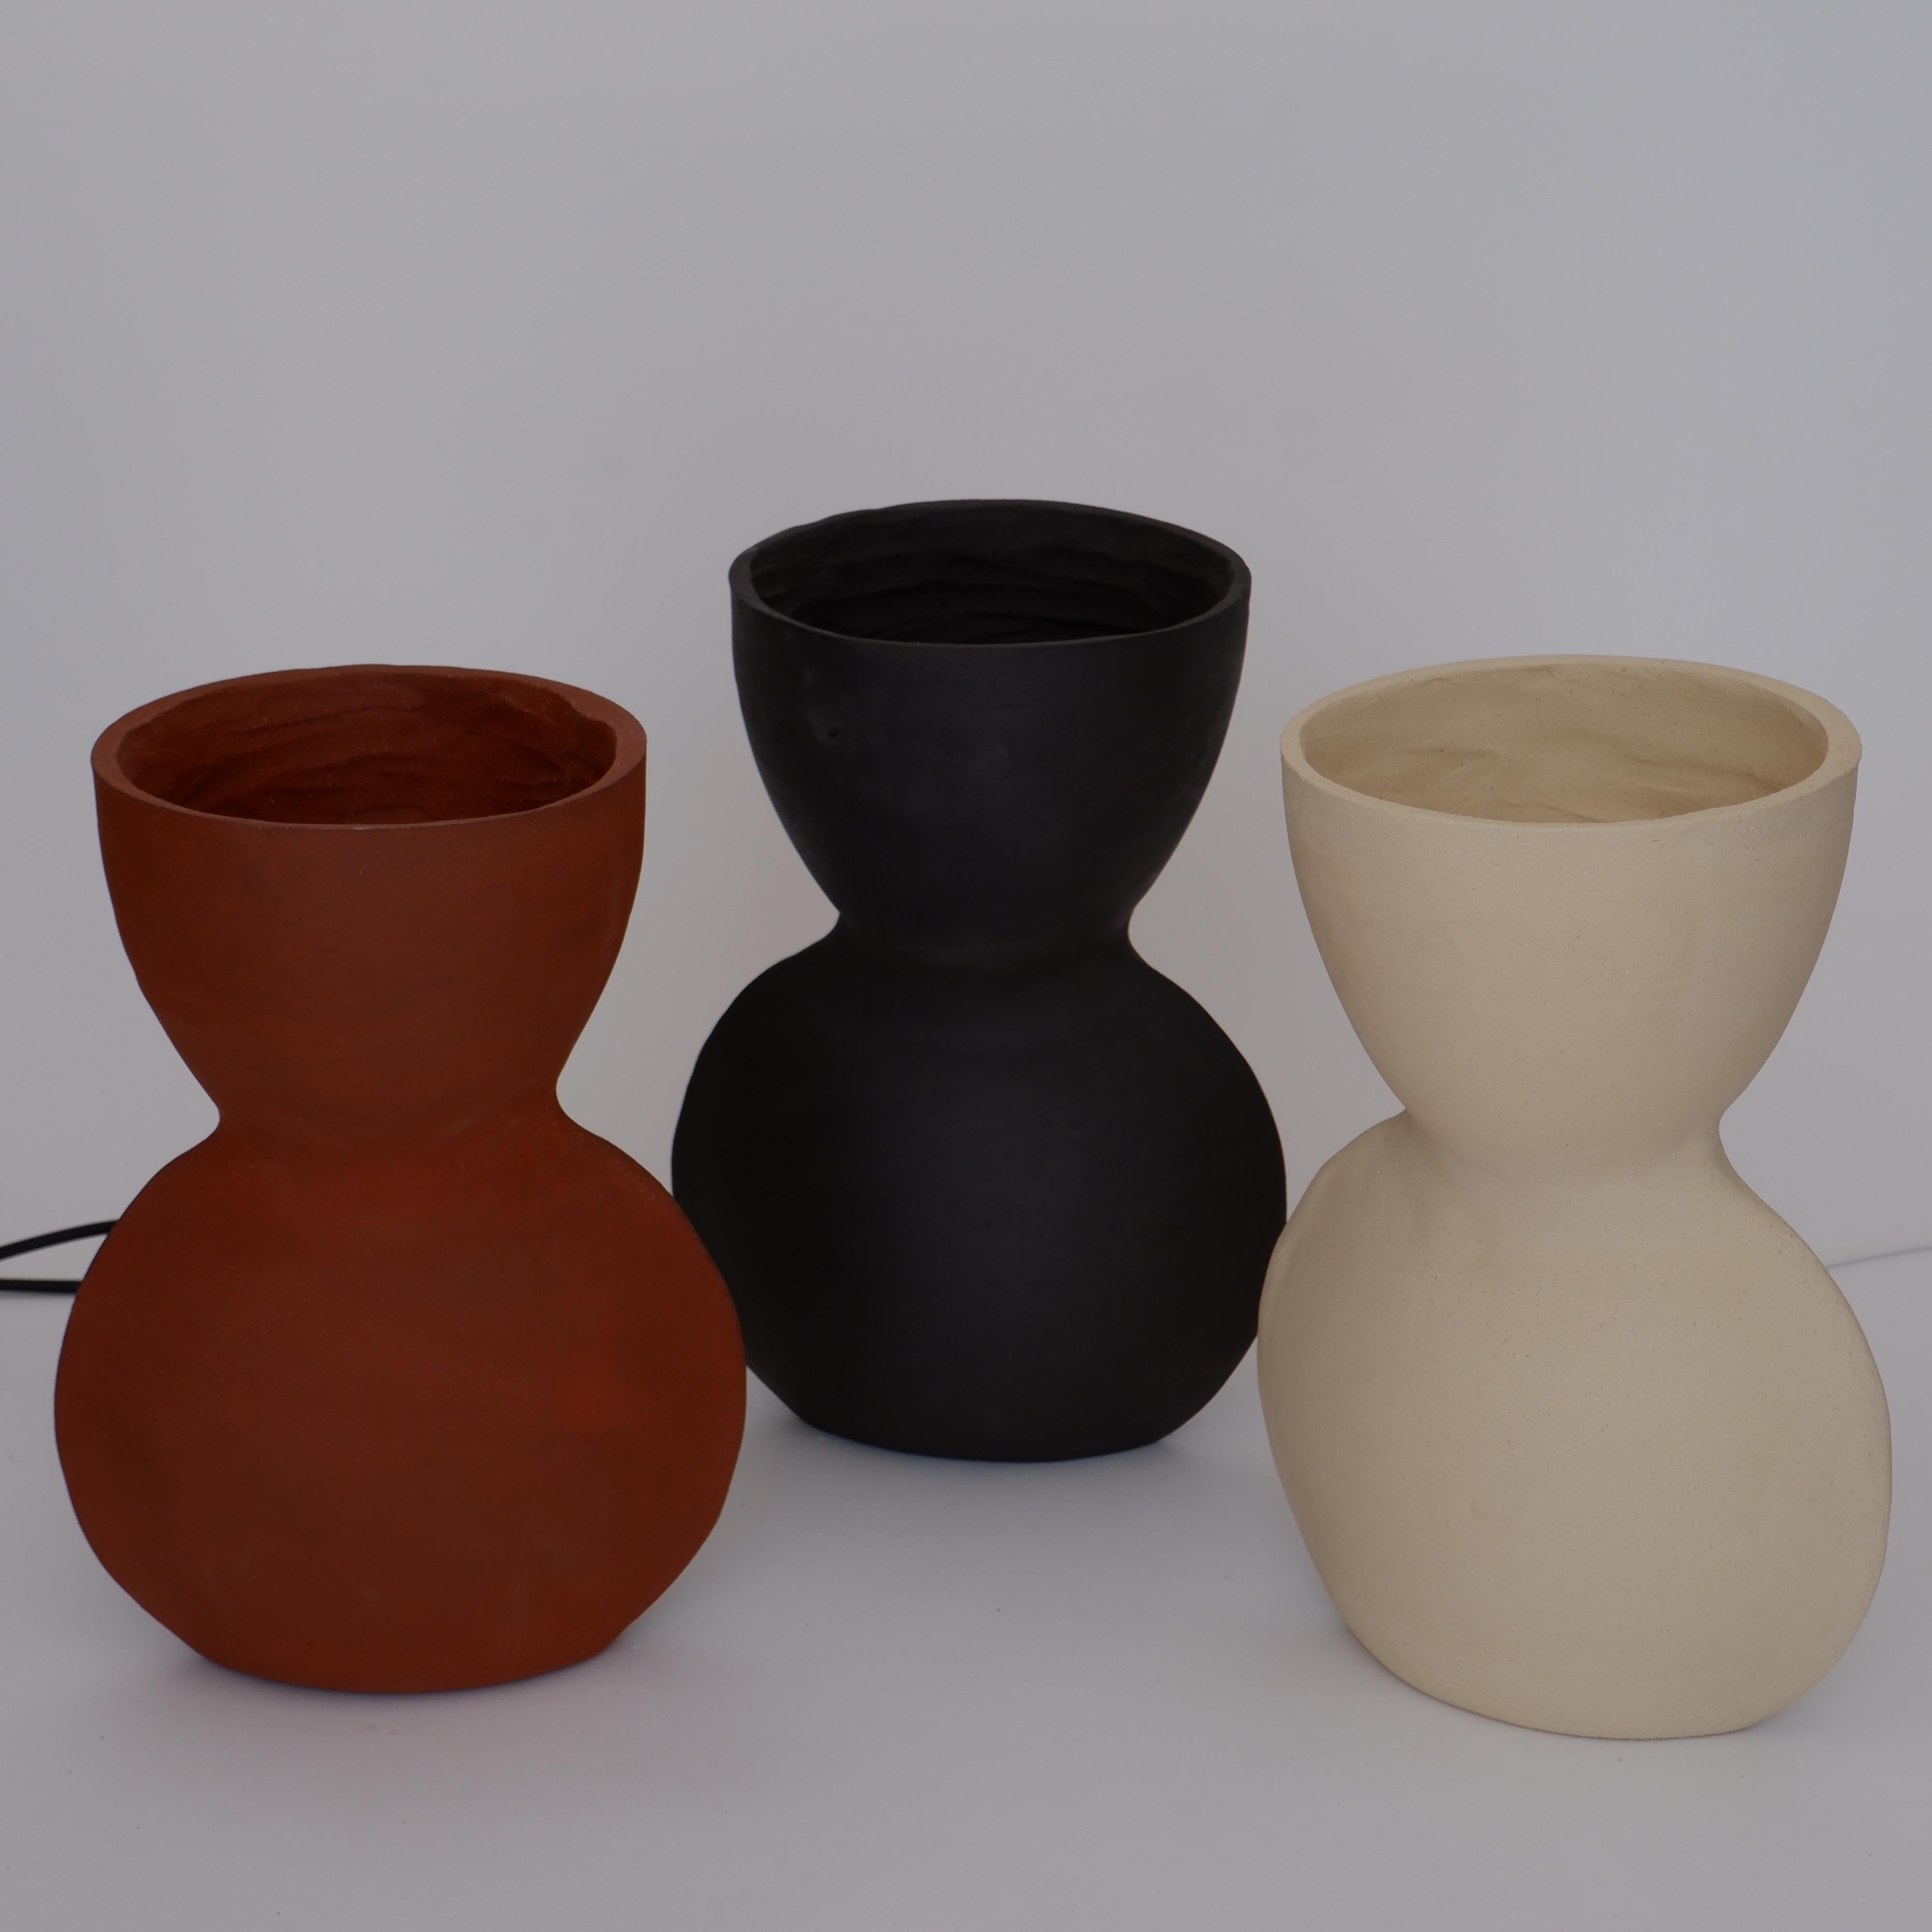 Set Of 3 Unira Big Lamps by Ia Kutateladze
One Of A Kind.
Dimensions: D 17 x W 23 x H 32 cm.
Materials: Clay.

Each piece is one of a kind, due to its free hand-building process. Different color variations available: raw black clay, raw white clay